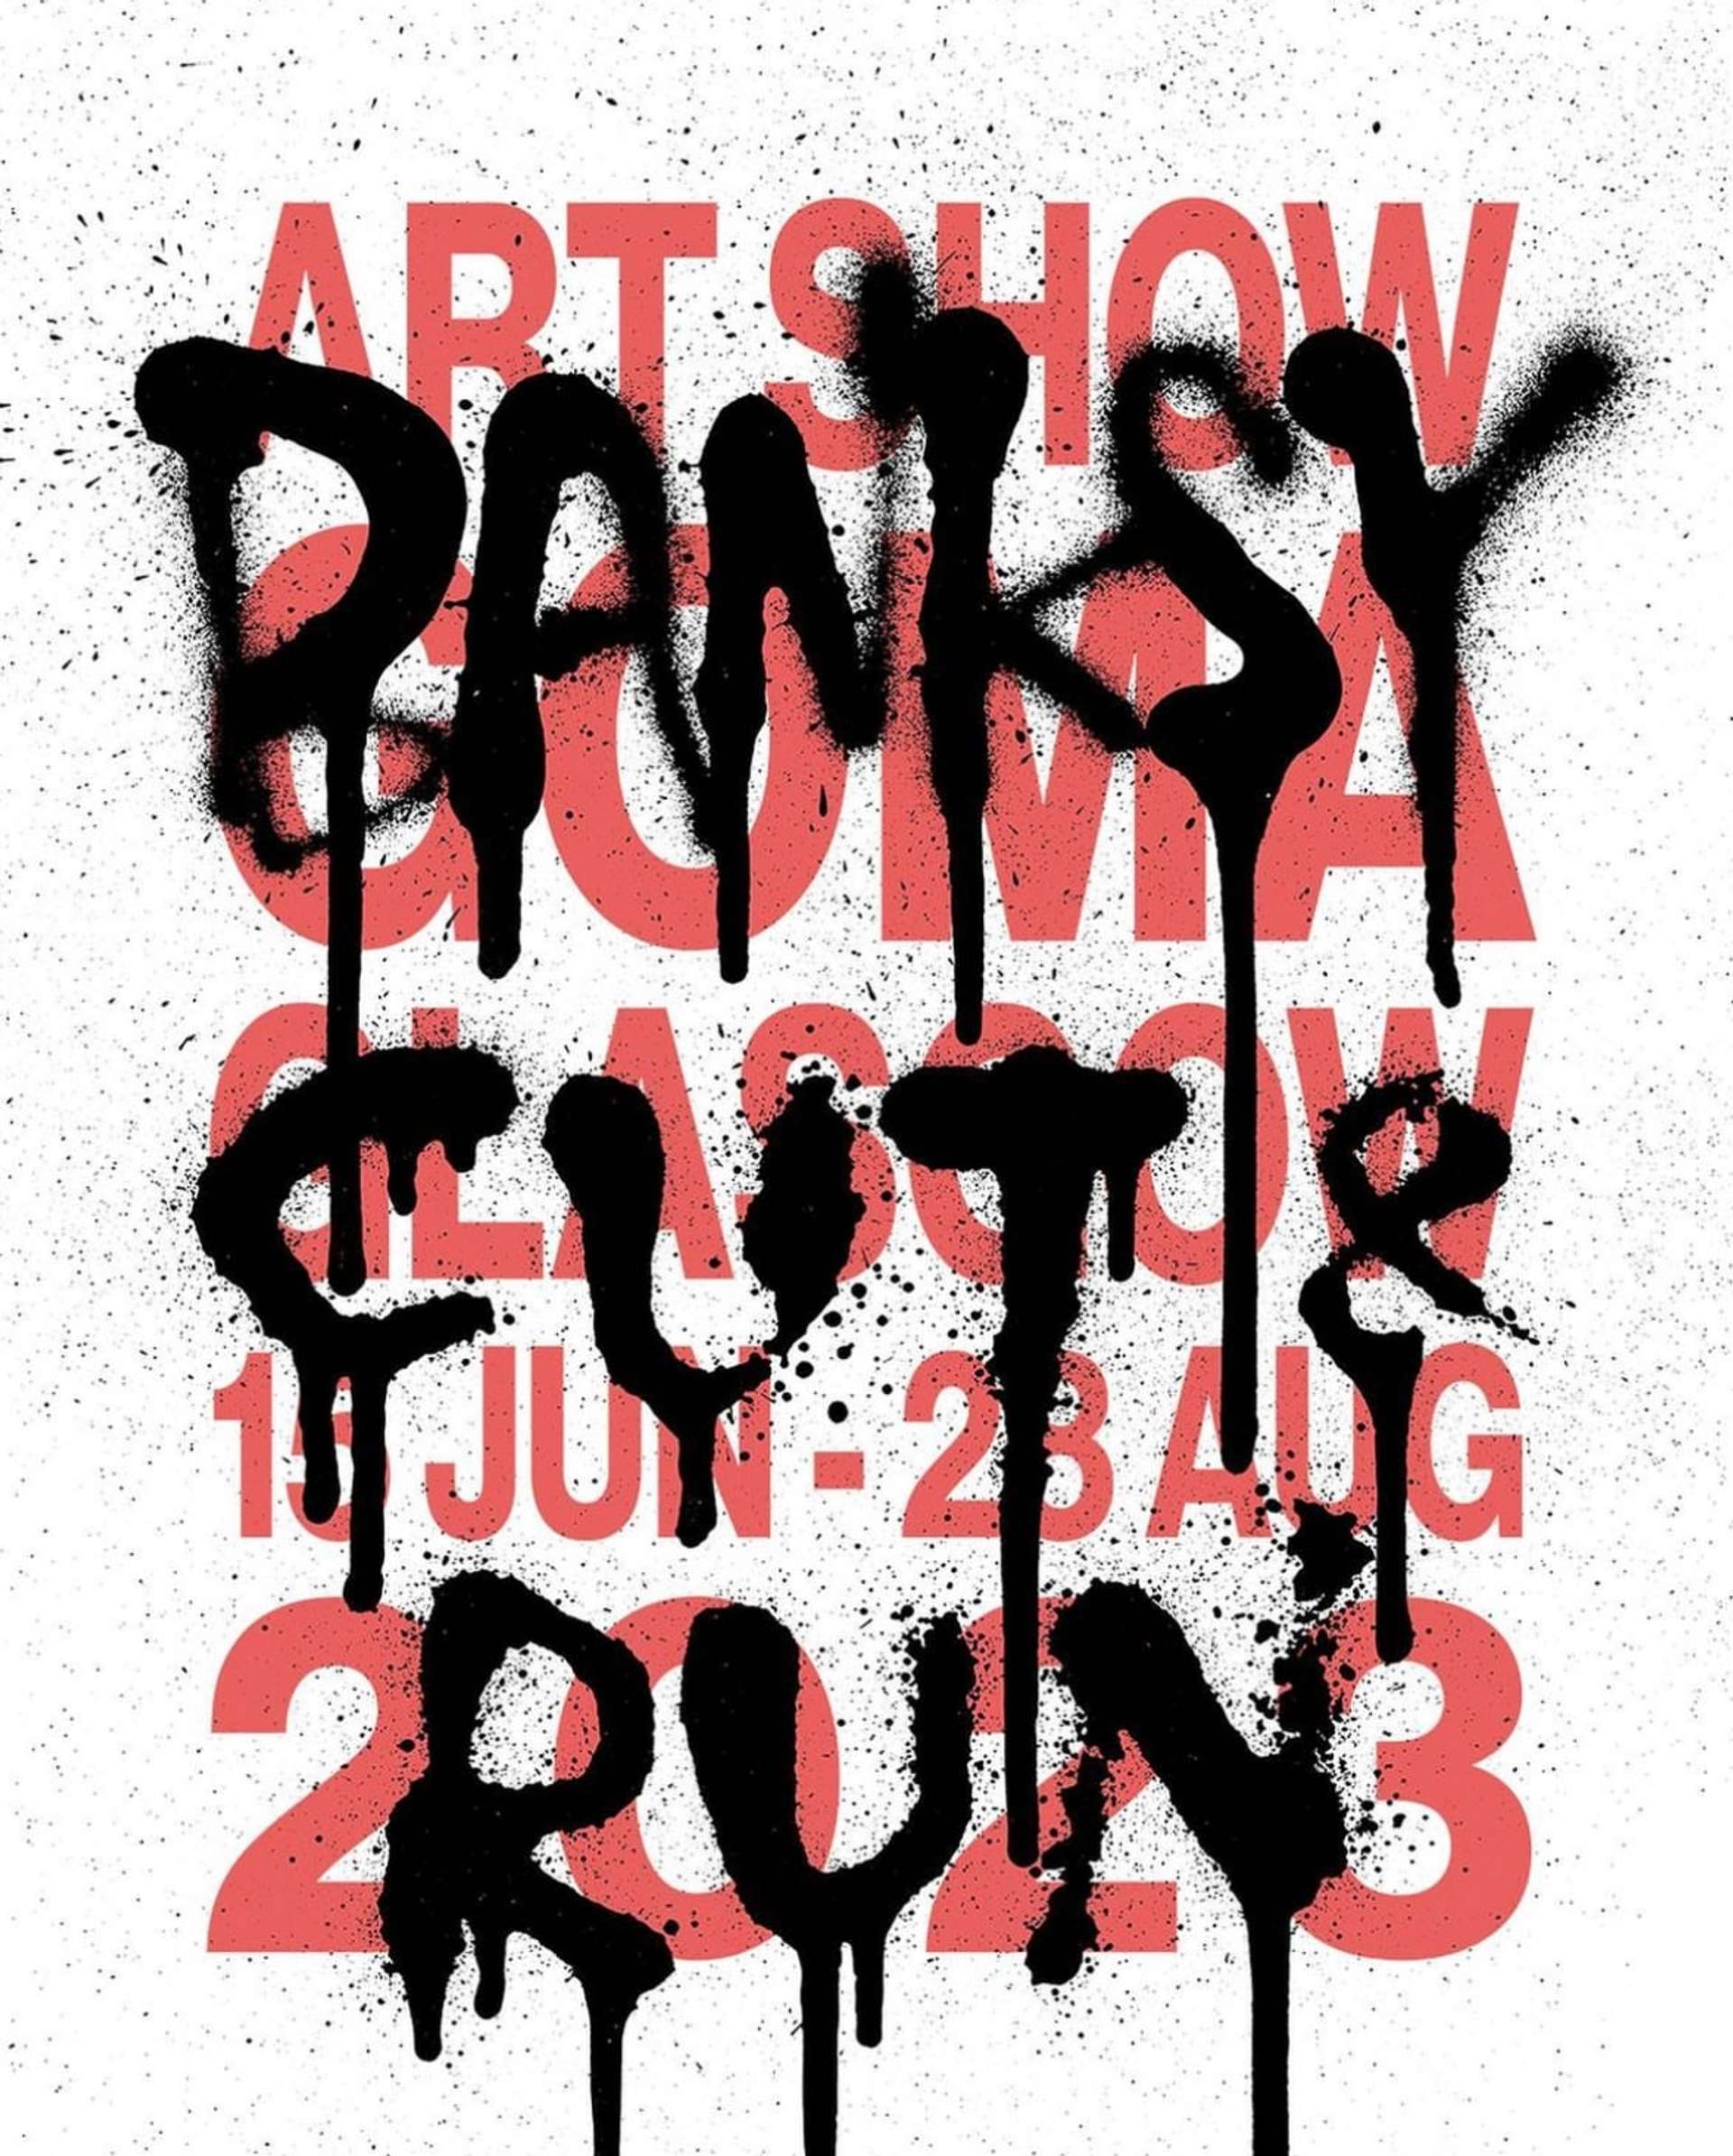 Banksy's promotional poster for Cut & Run Exhibition in Glasgow's Gallery of Modern Art